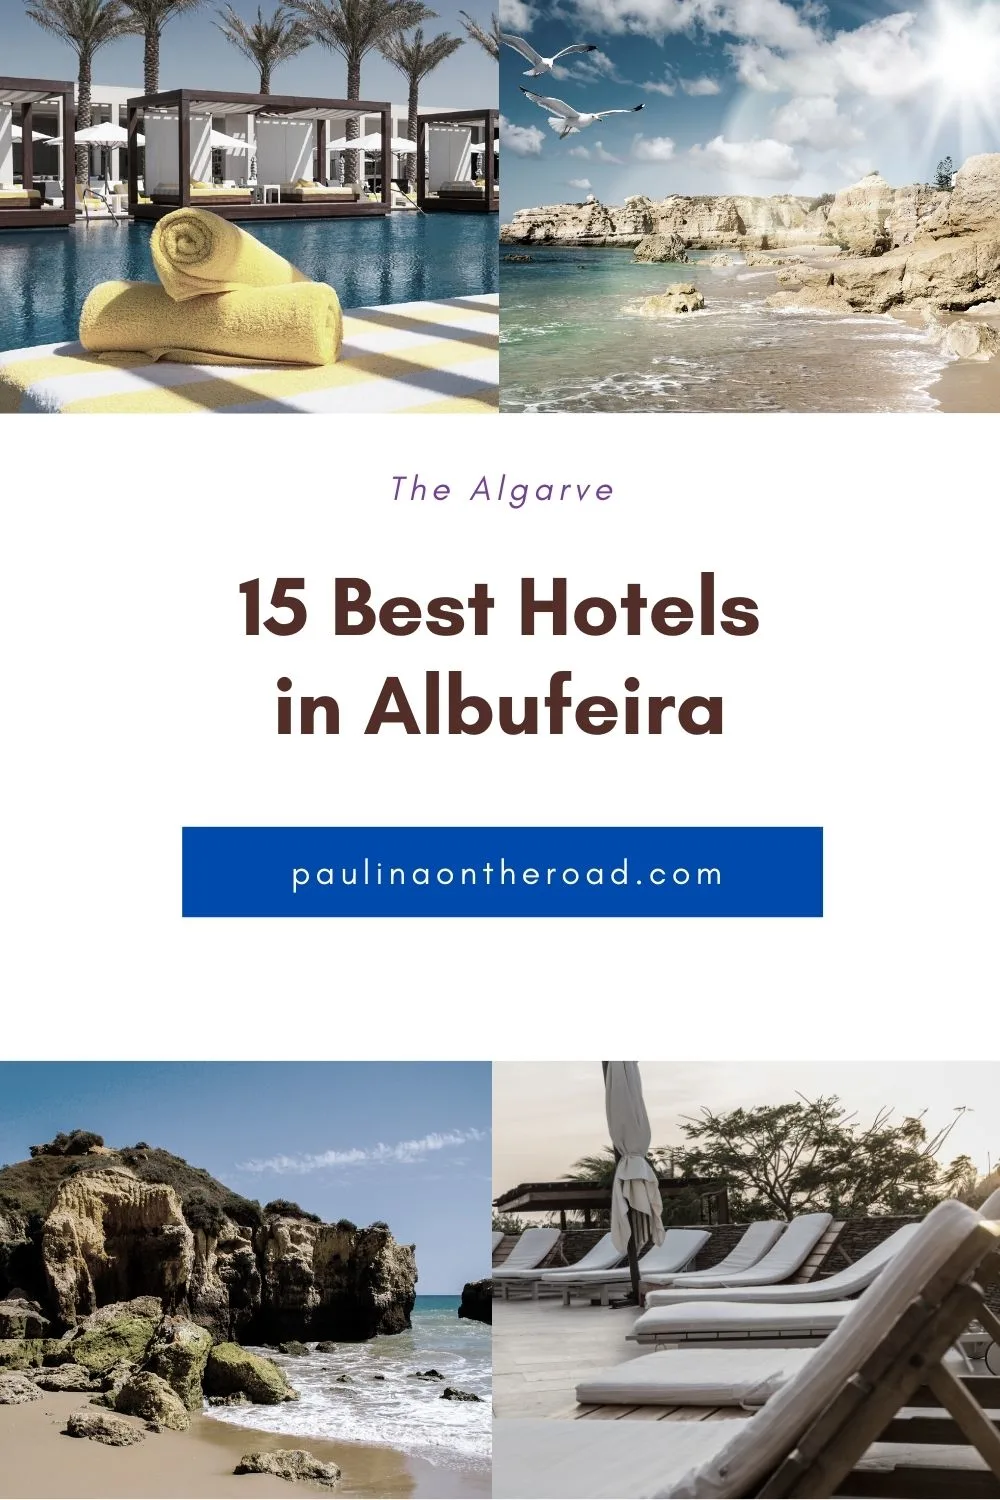 Are you looking for the best hotels in Albufeira but confused about which one to choose? If yes, then you have come to the right place. This guide has all the best Albufeira accommodation options, including budget and luxury hotels in Albufeira and Albufeira hotels on the beach! #Albufeira #Algarve #Portugal #Hotels #AlgarvePortugal #VisitPortugal #VisitAlbufeira #AlbufeiraPortugal #BeachVacation #Holiday